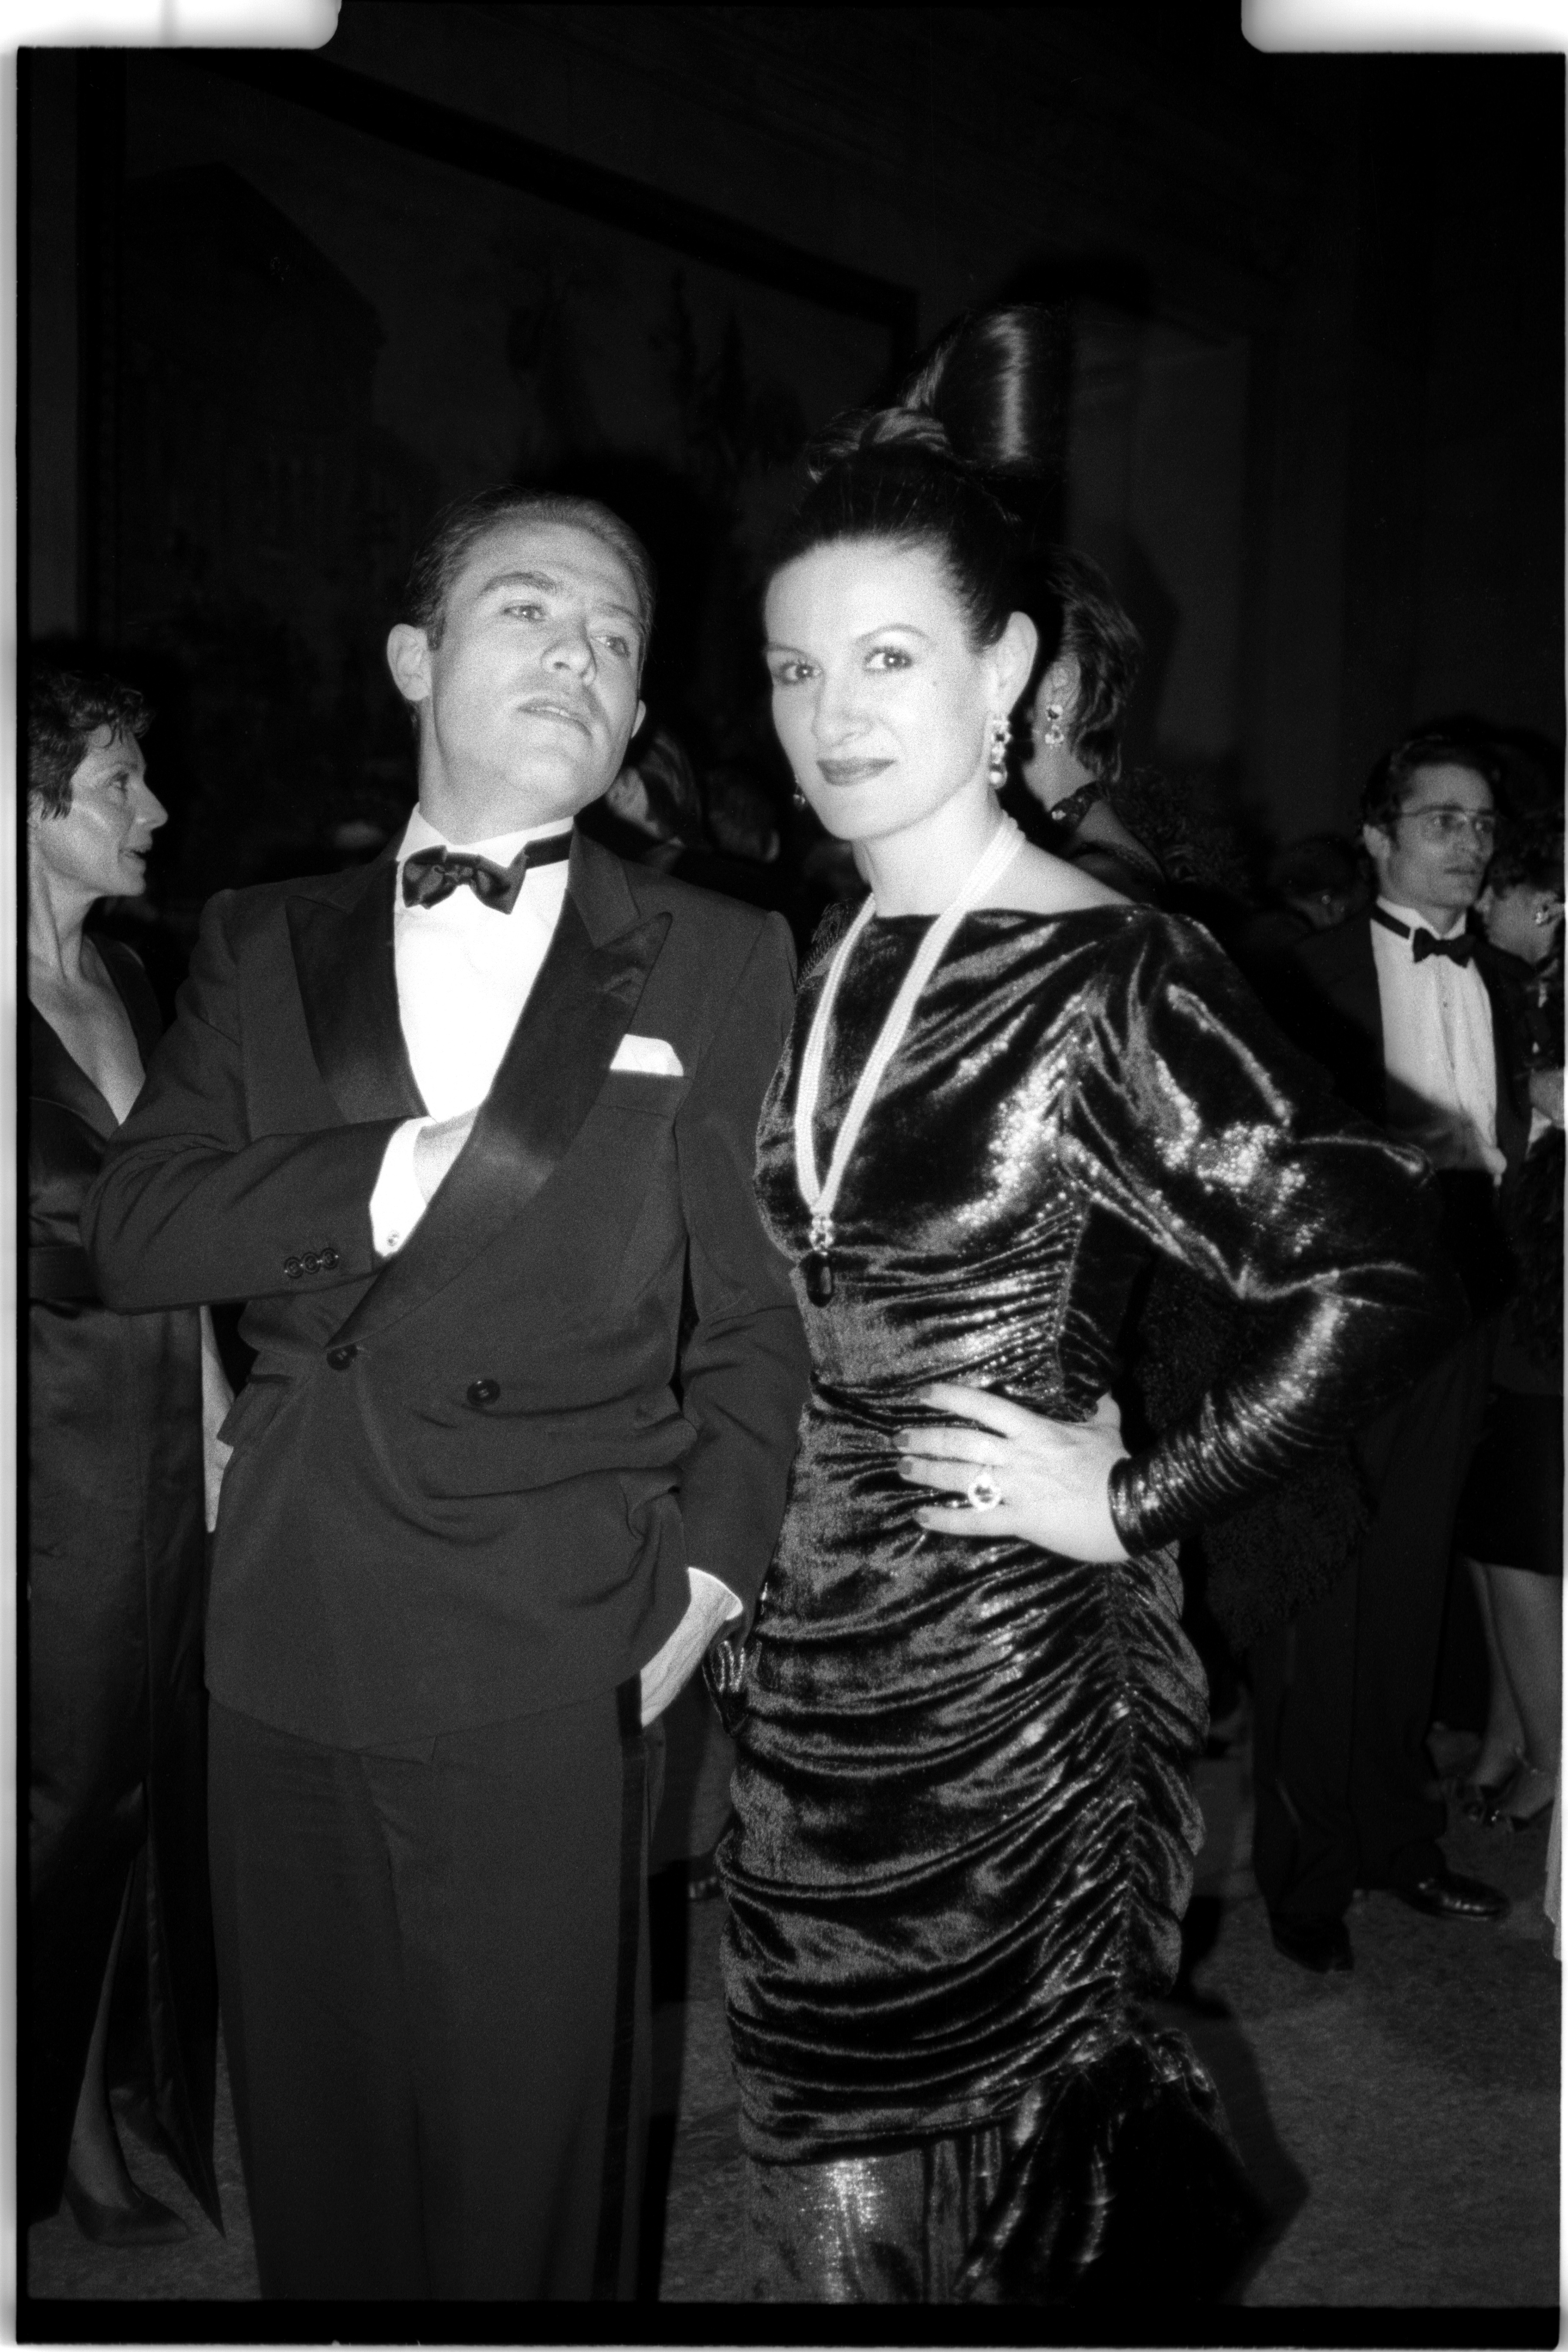 Paloma Picasso at the met gala 1983